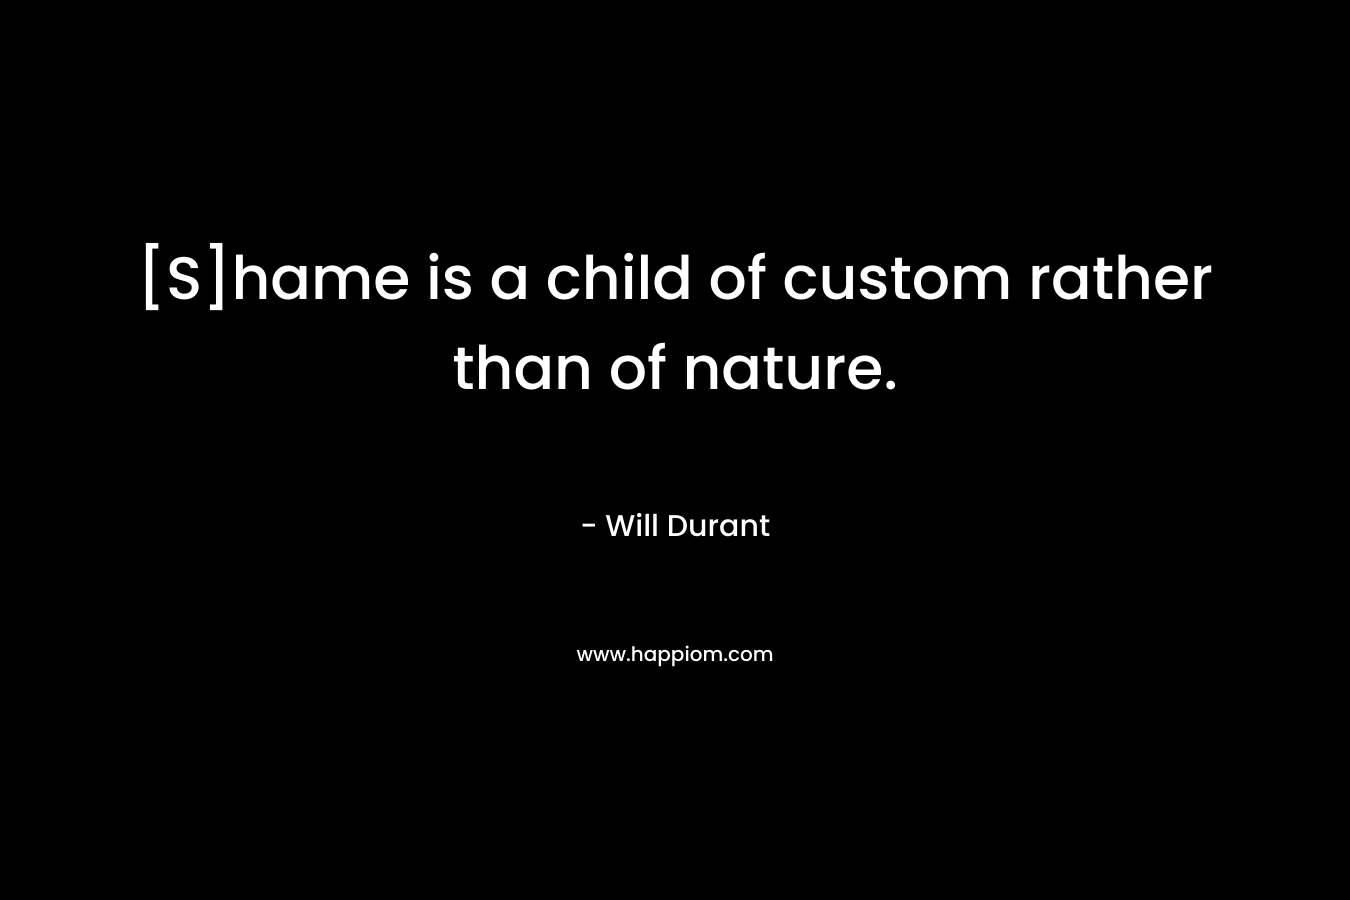 [S]hame is a child of custom rather than of nature.